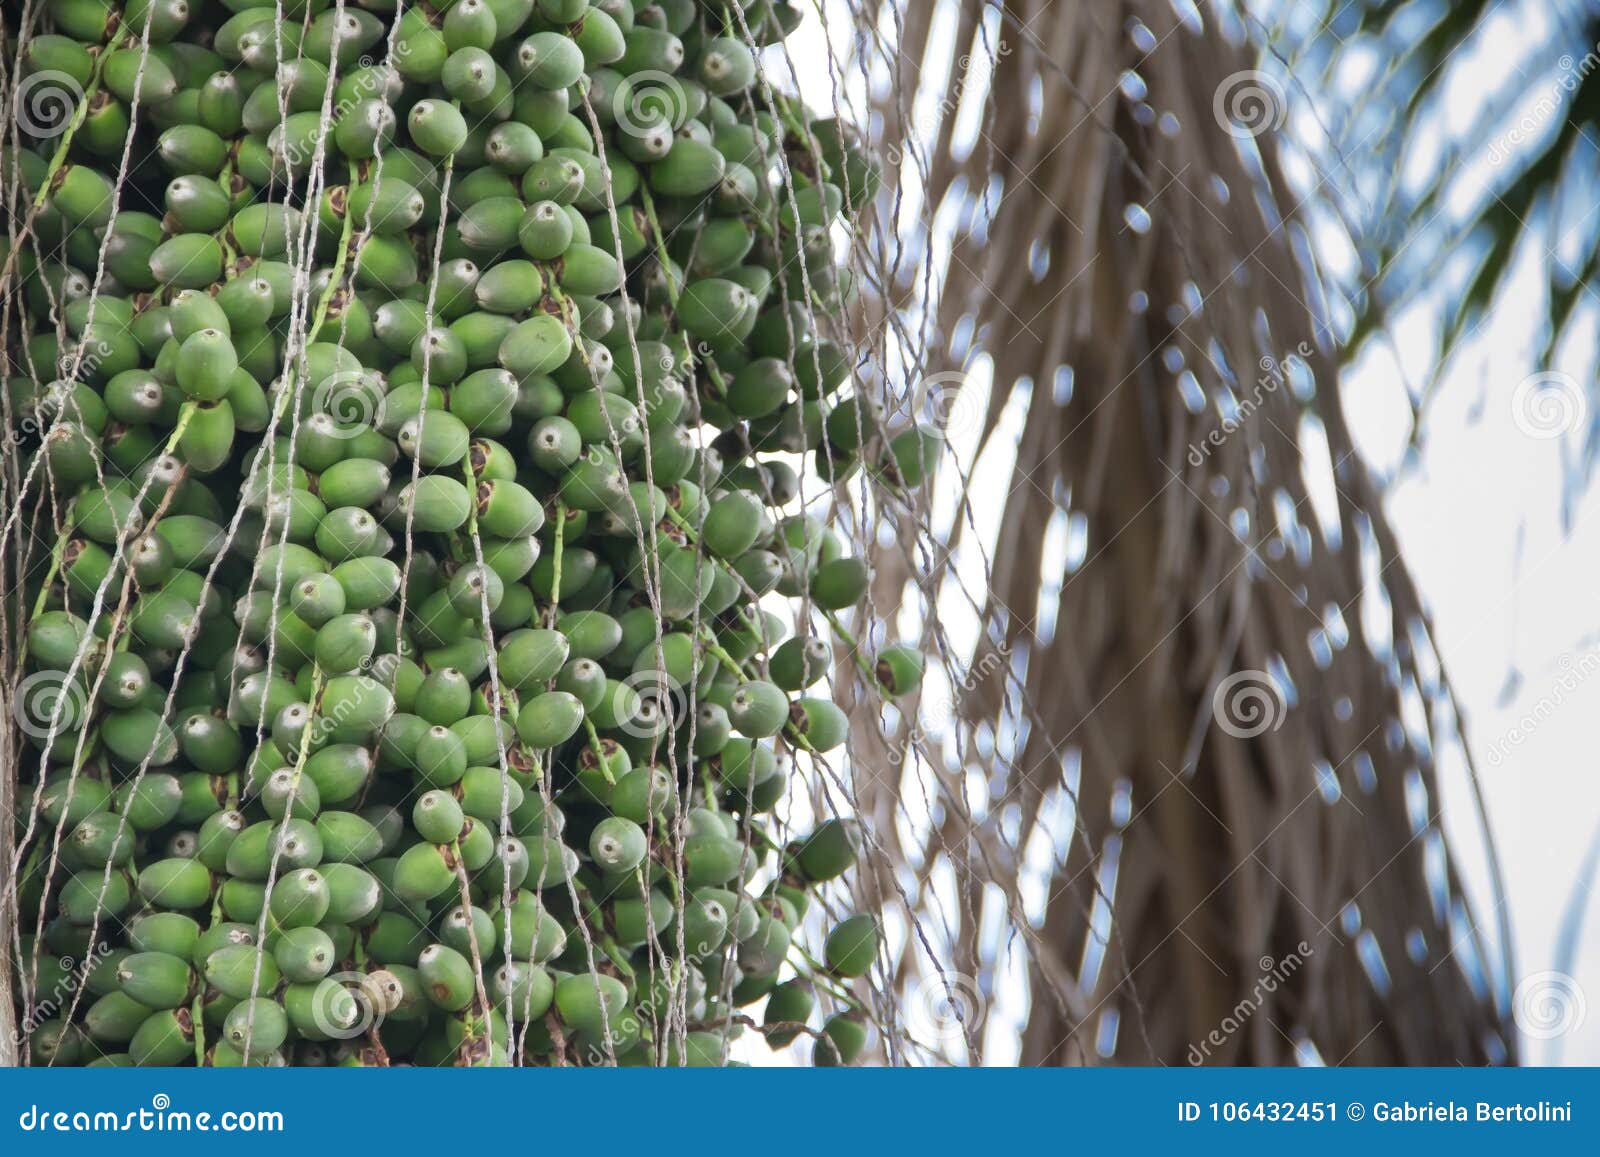 green dates palm tree in summer in the city of federation, province of entre rios argentina